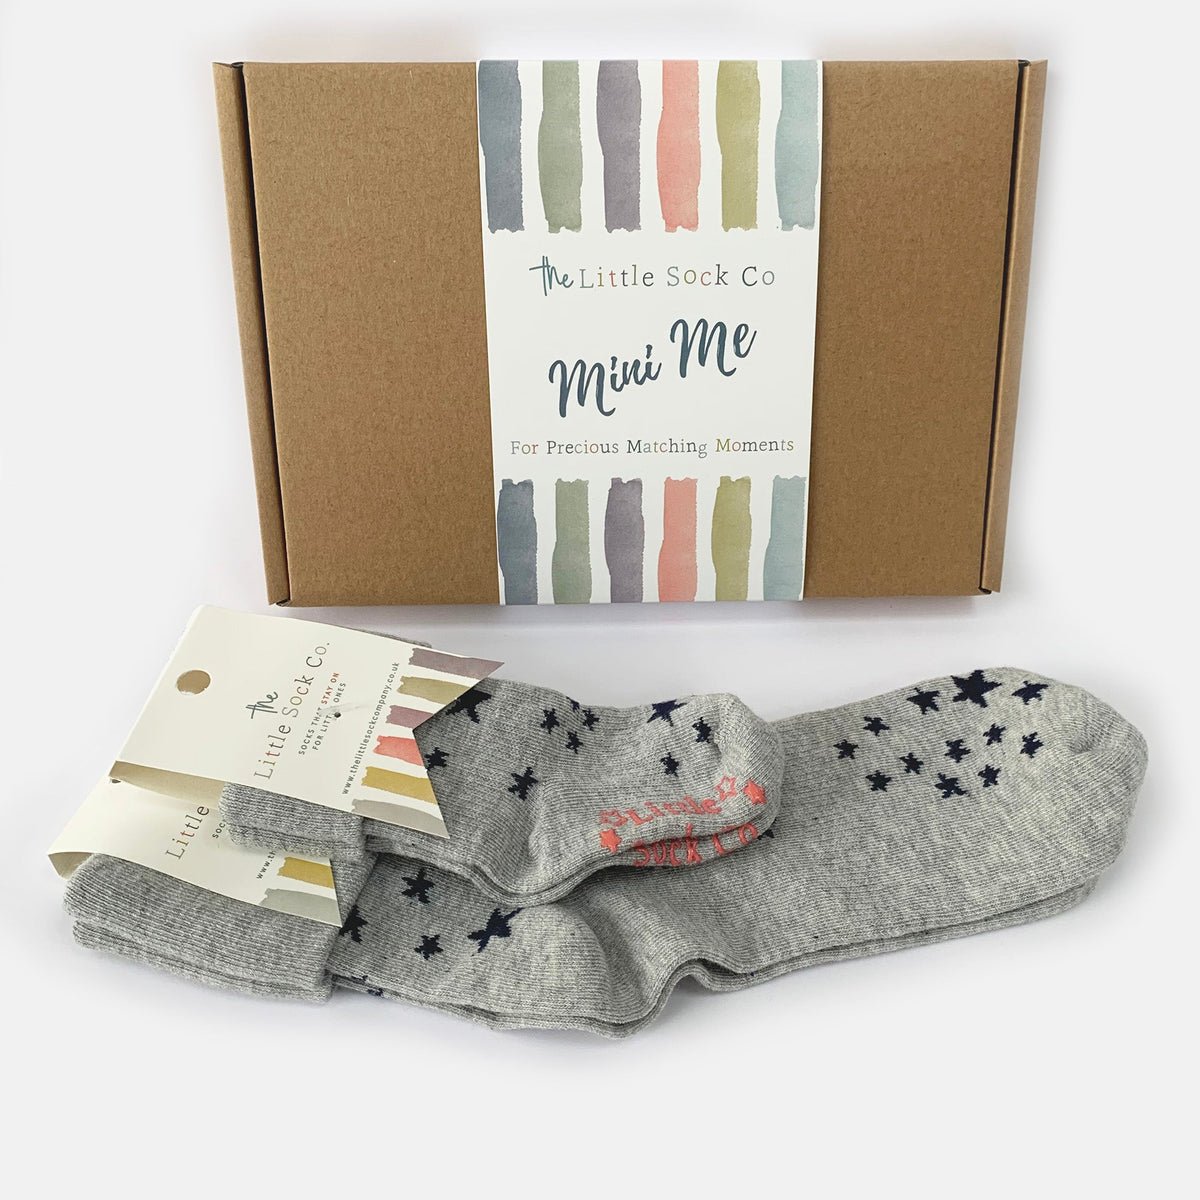 Personalised Mini Me Matching Adult and Child Family Socks Gift Set in Stars ⭐️ - The Perfect Personalised Gift for Birthdays or Grandparents Day